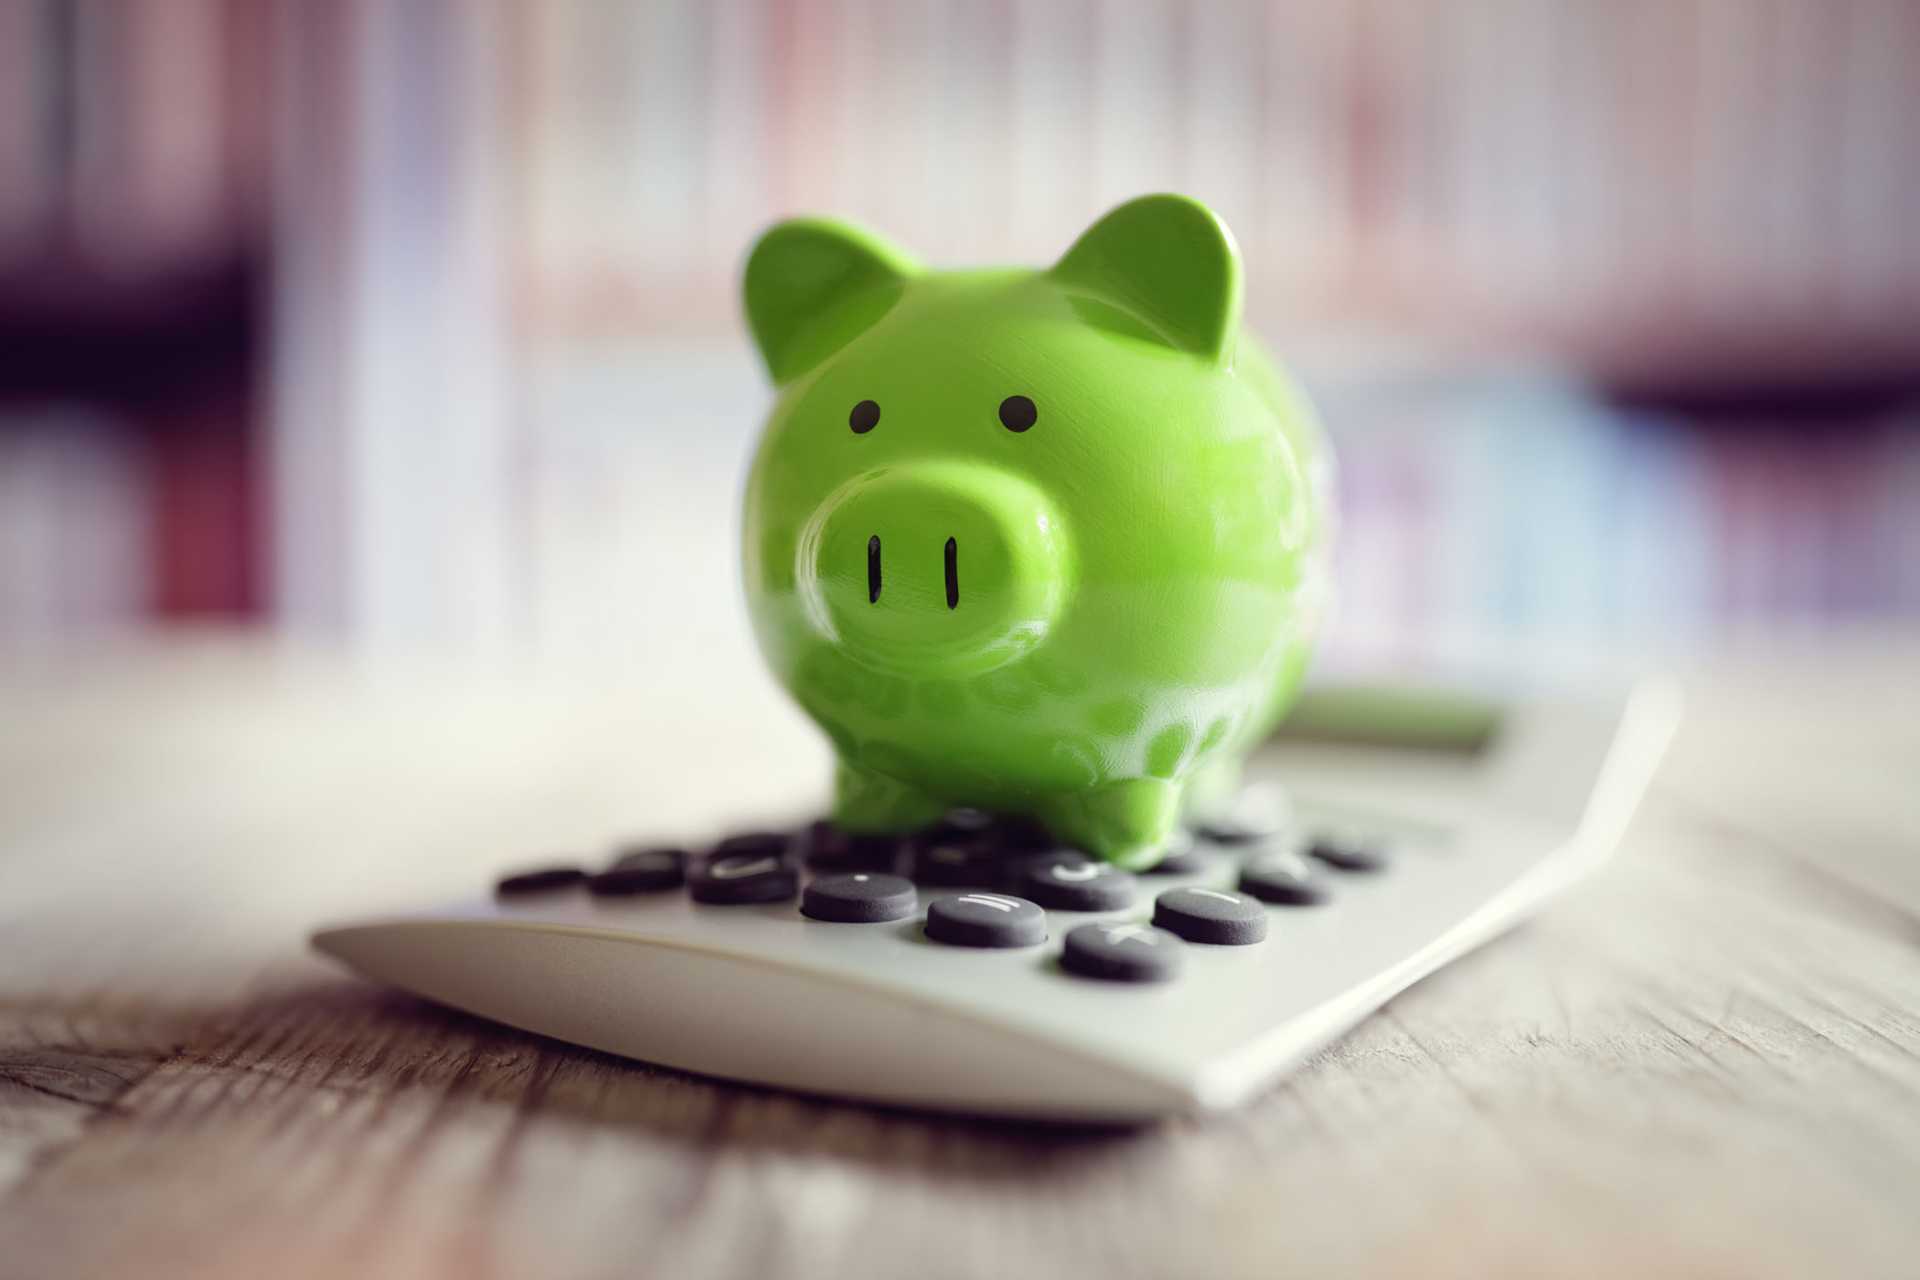 Image of a green ceramic piggy bank sitting on a calculator